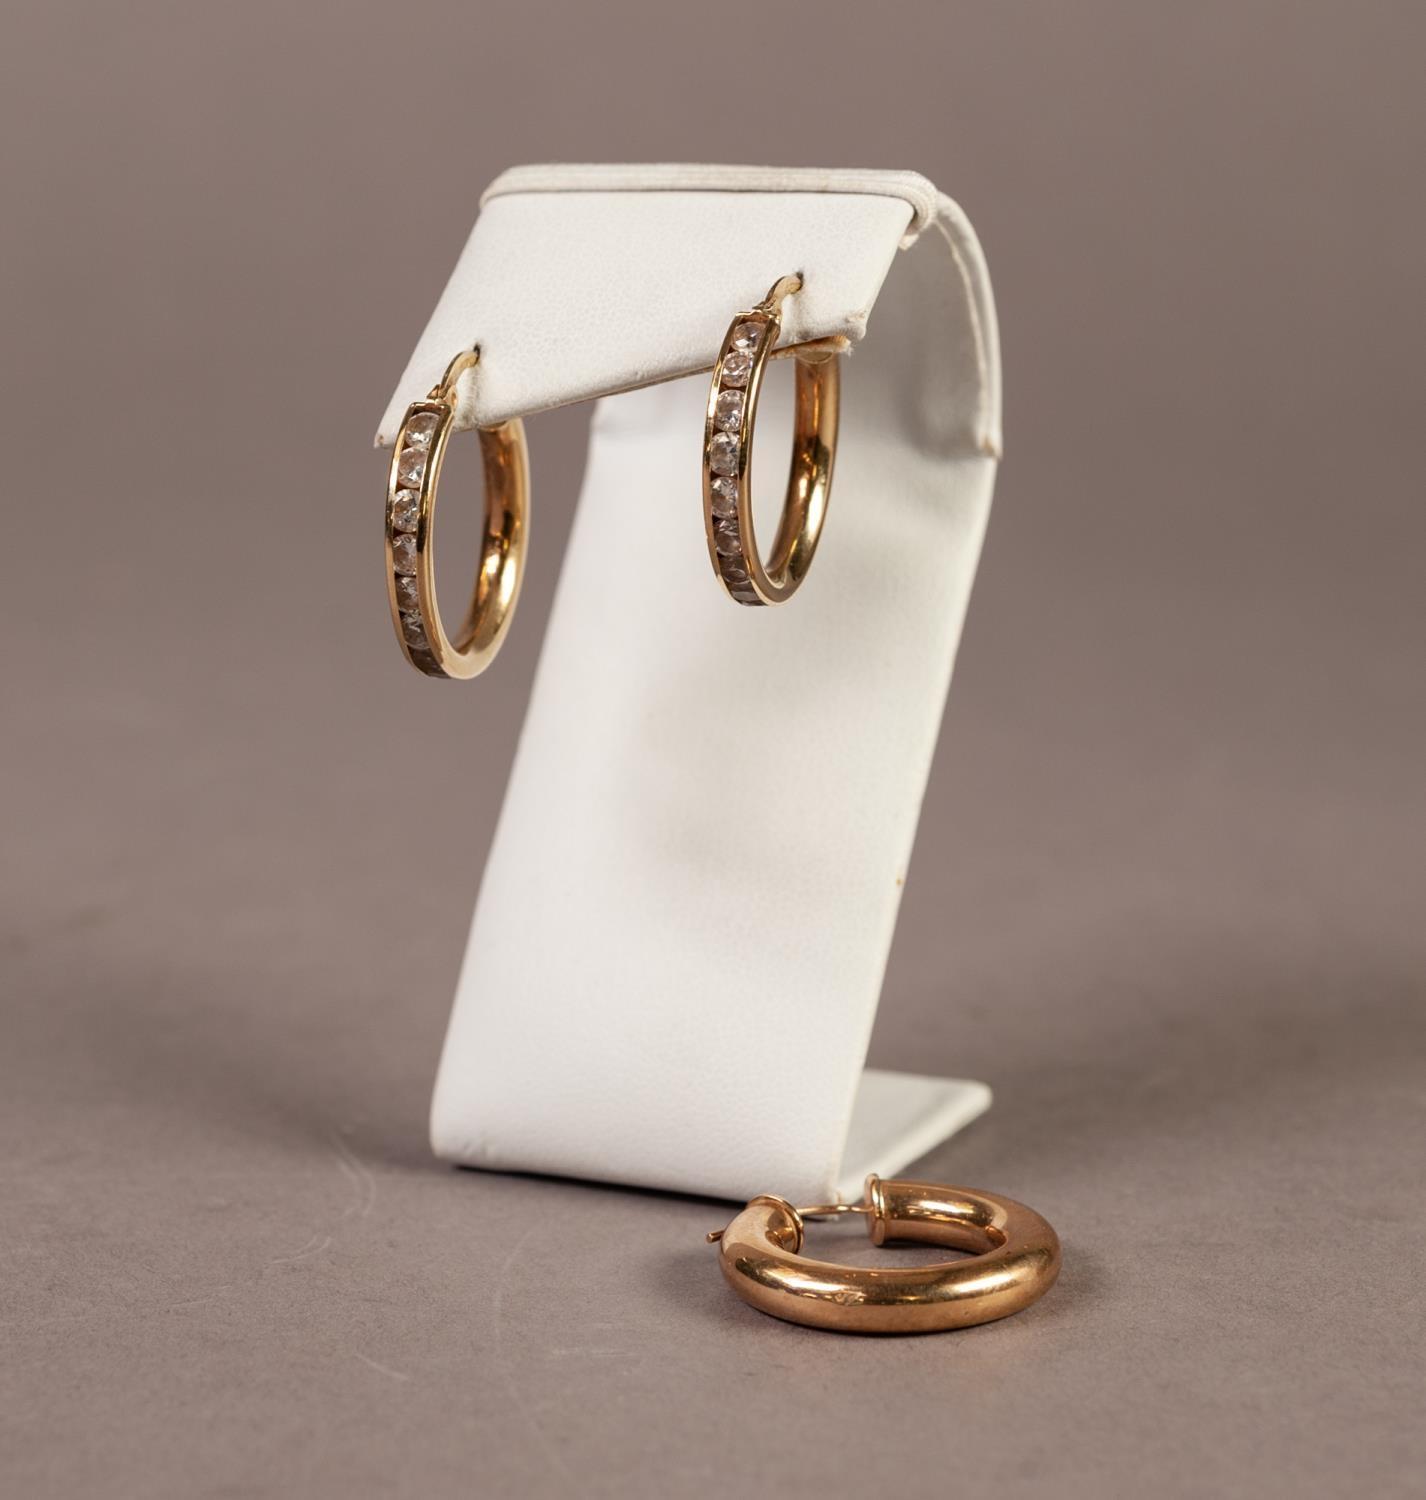 PAIR OF 9ct GOLD AND CUBIC ZIRCONIA SET HOOP EARRINGS and a single 9ct GOLD HOOP EARRING, 5.5gms